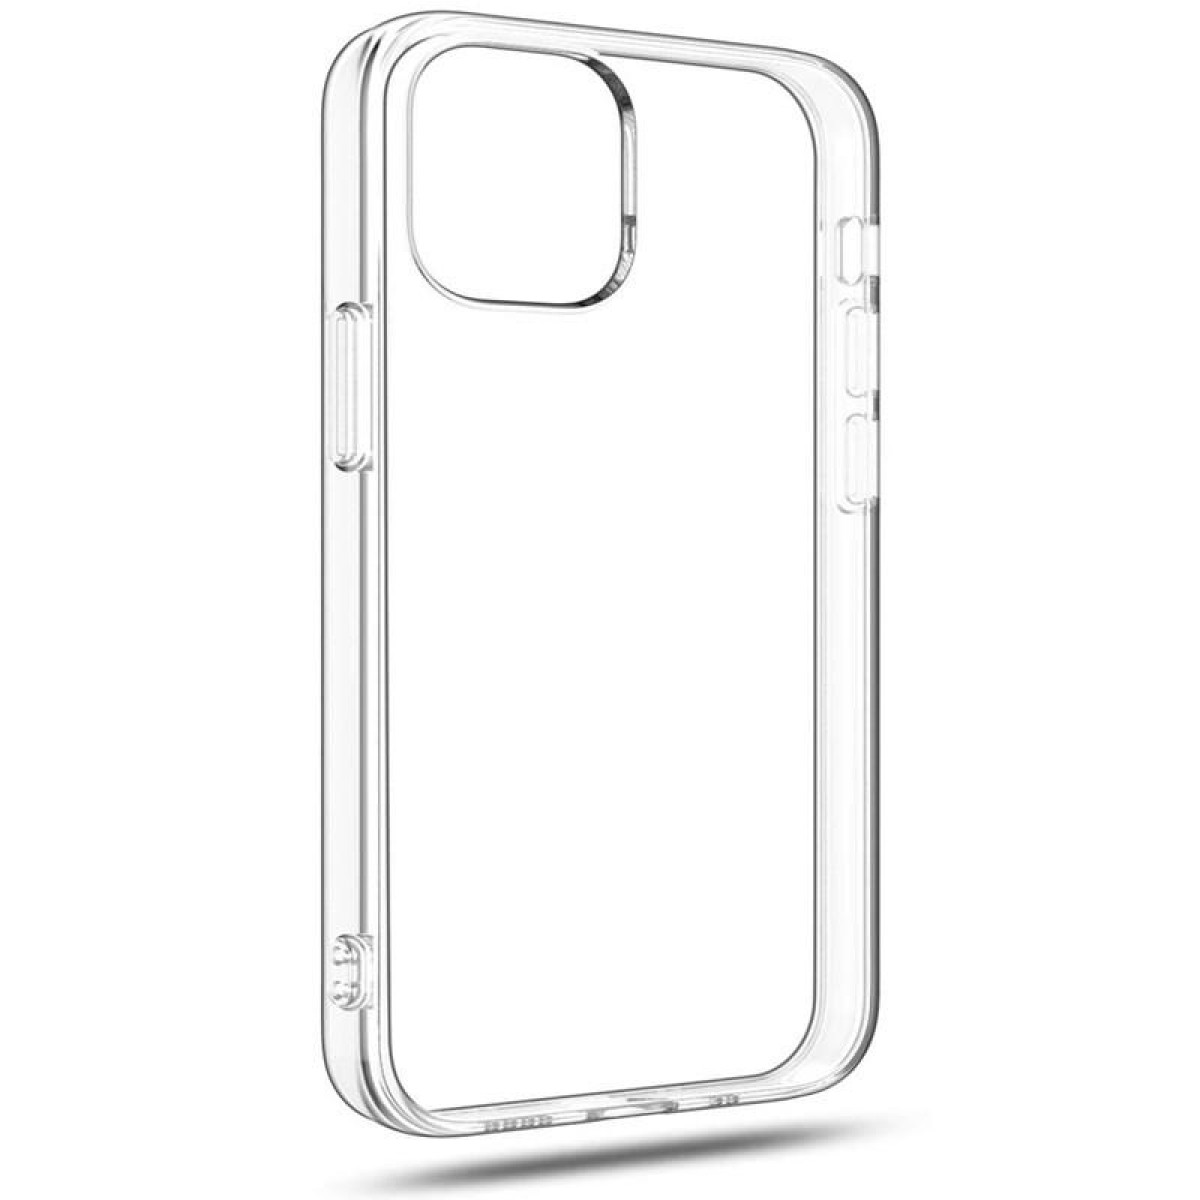 13, TPU, iPhone INF 13 iPhone Backcover, transparent Apple, Hülle